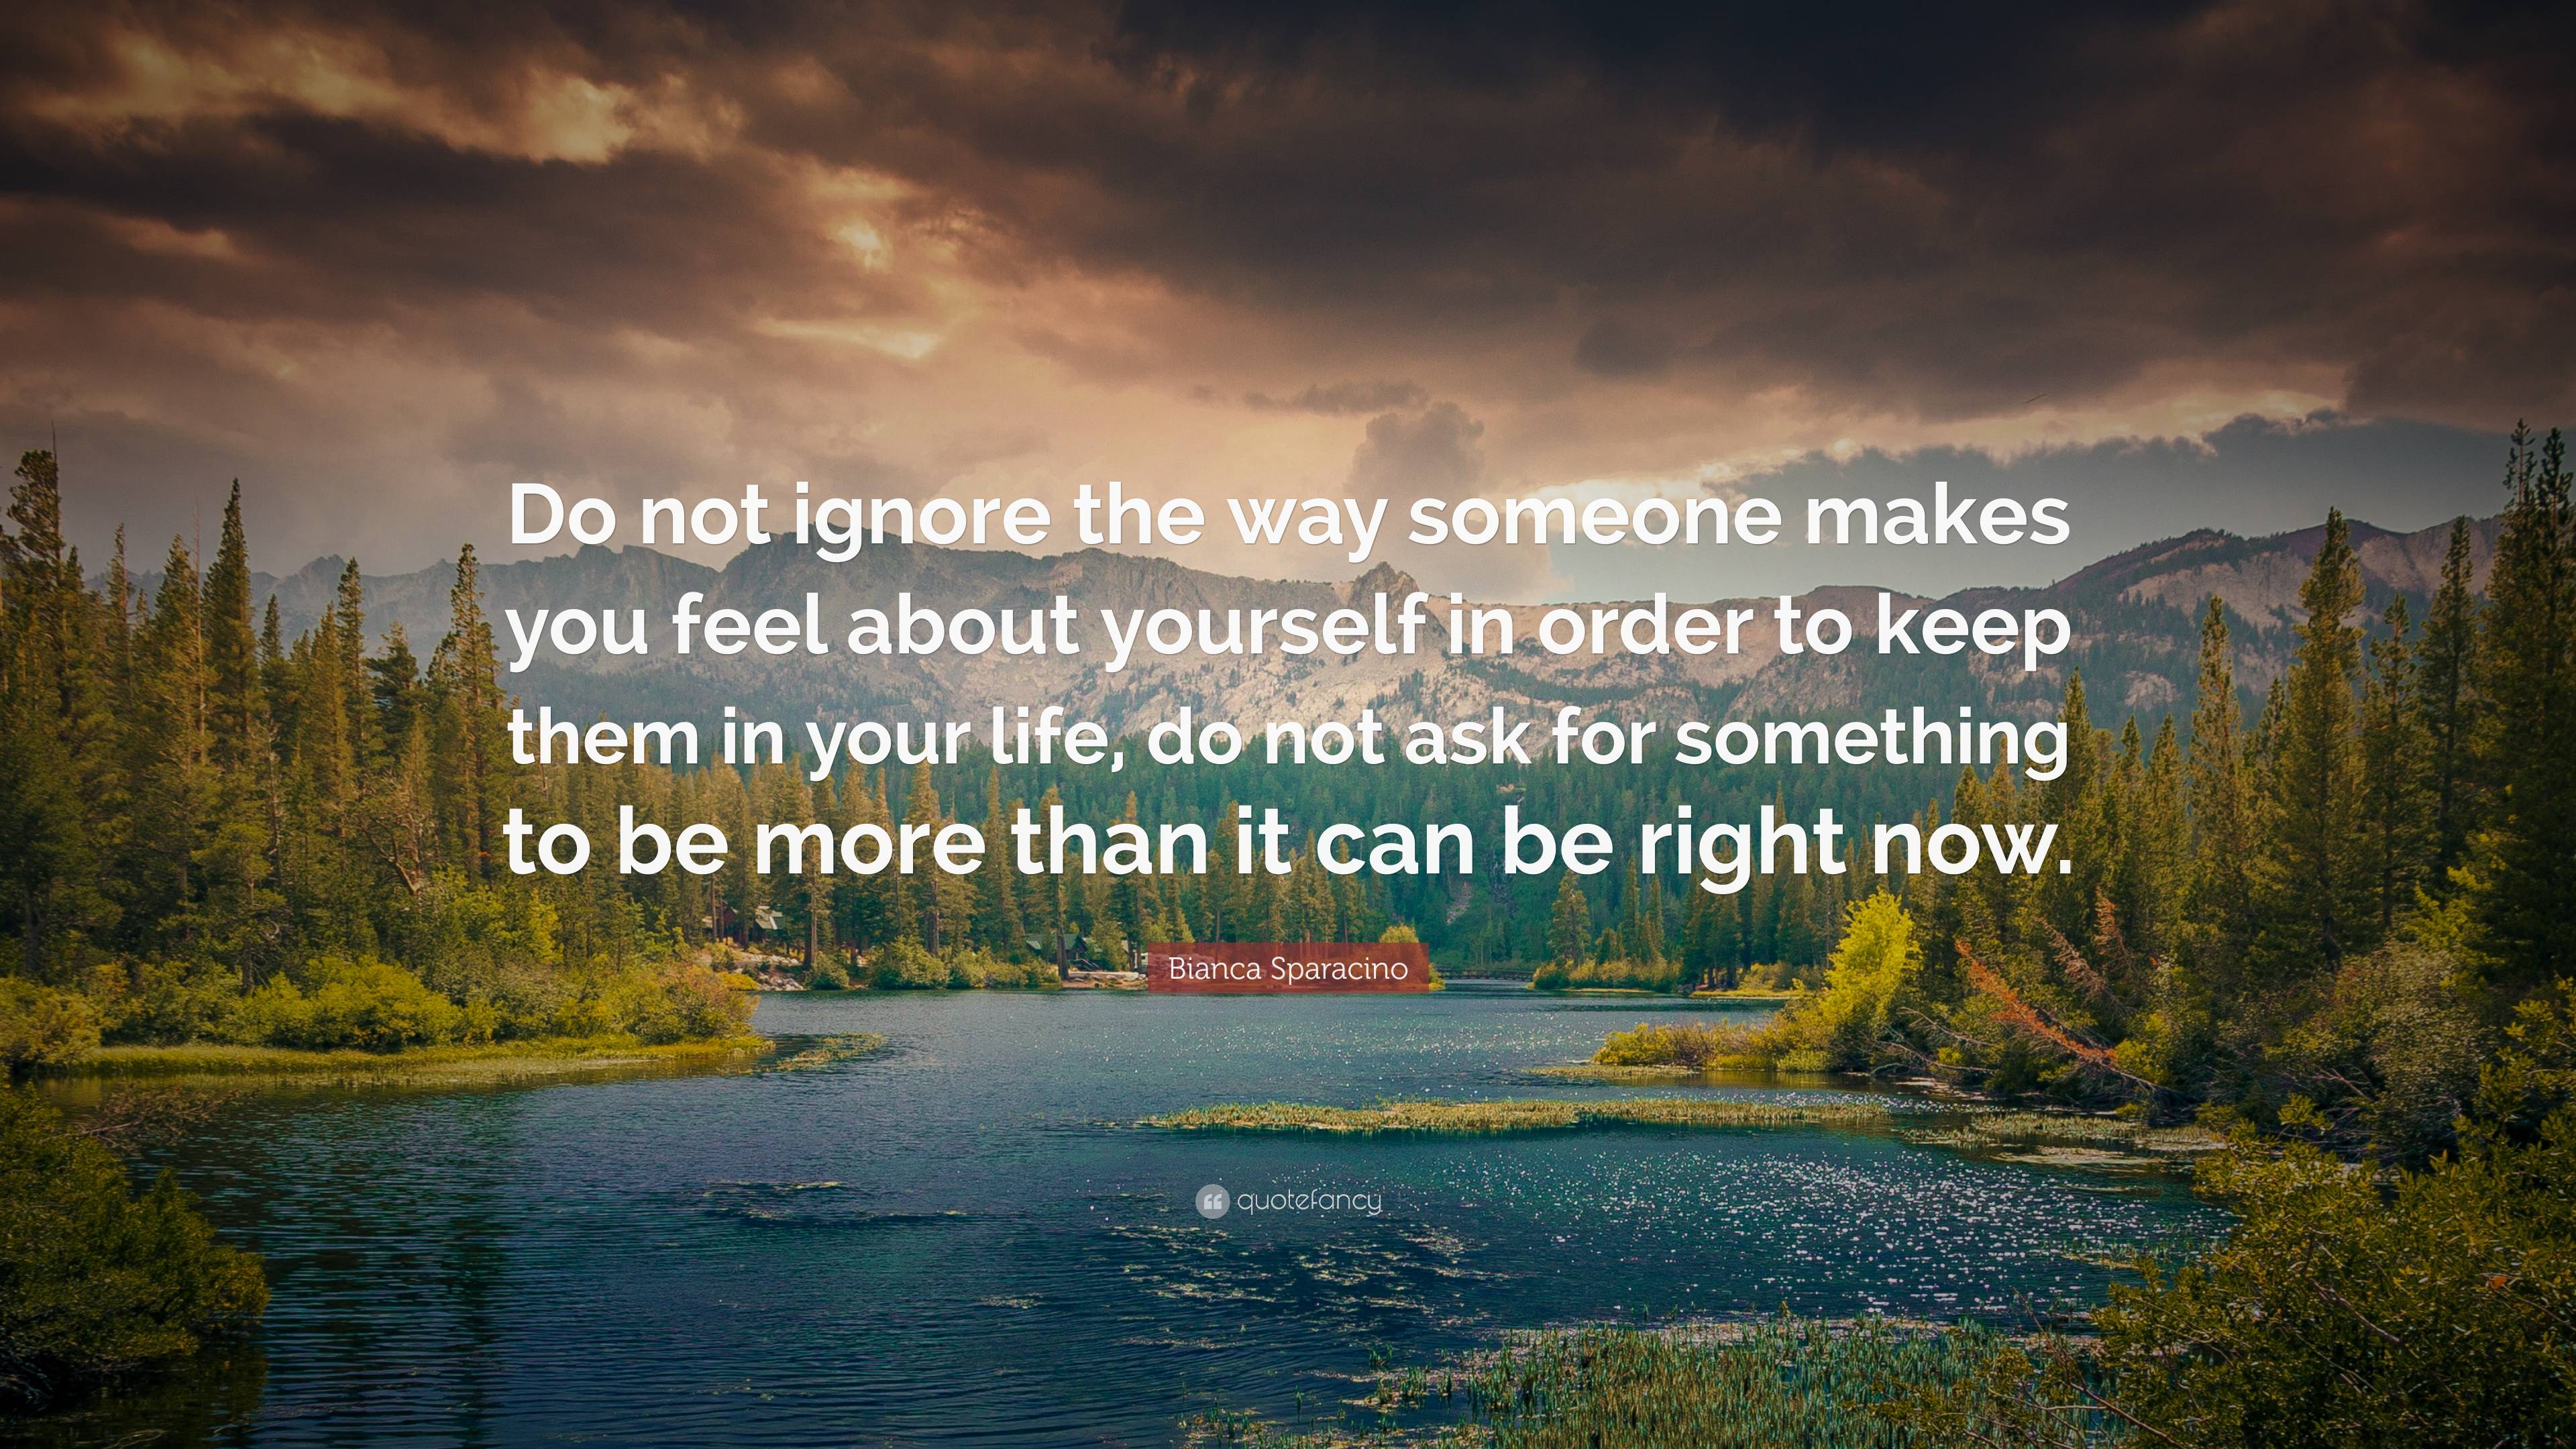 Bianca Sparacino Quote: “Do not ignore the way someone makes you feel ...